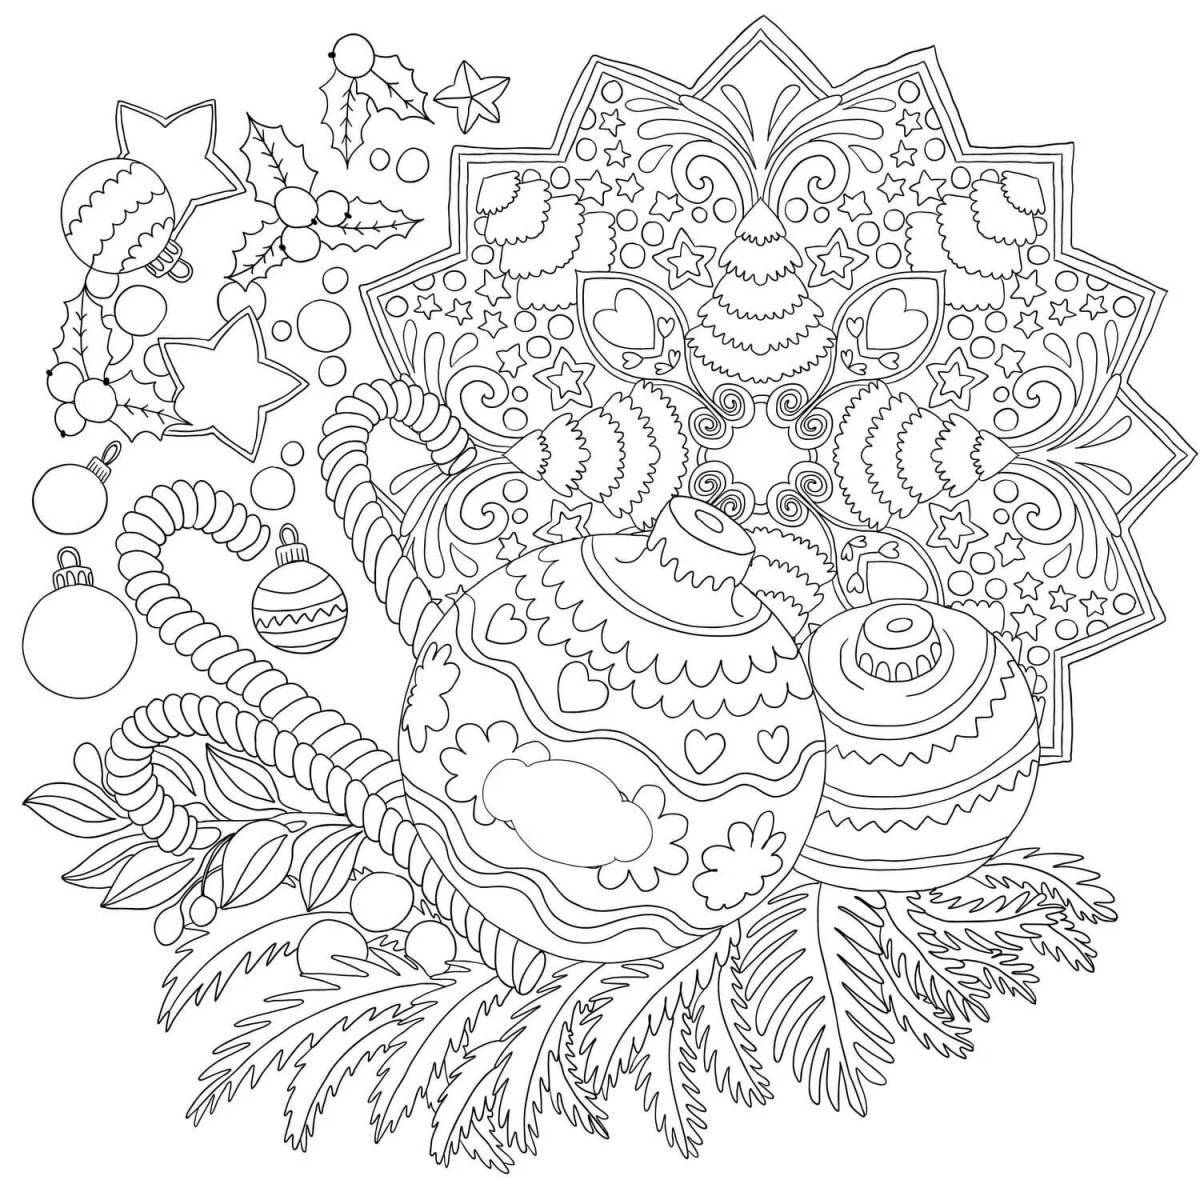 Merry winter anti-stress coloring book for kids